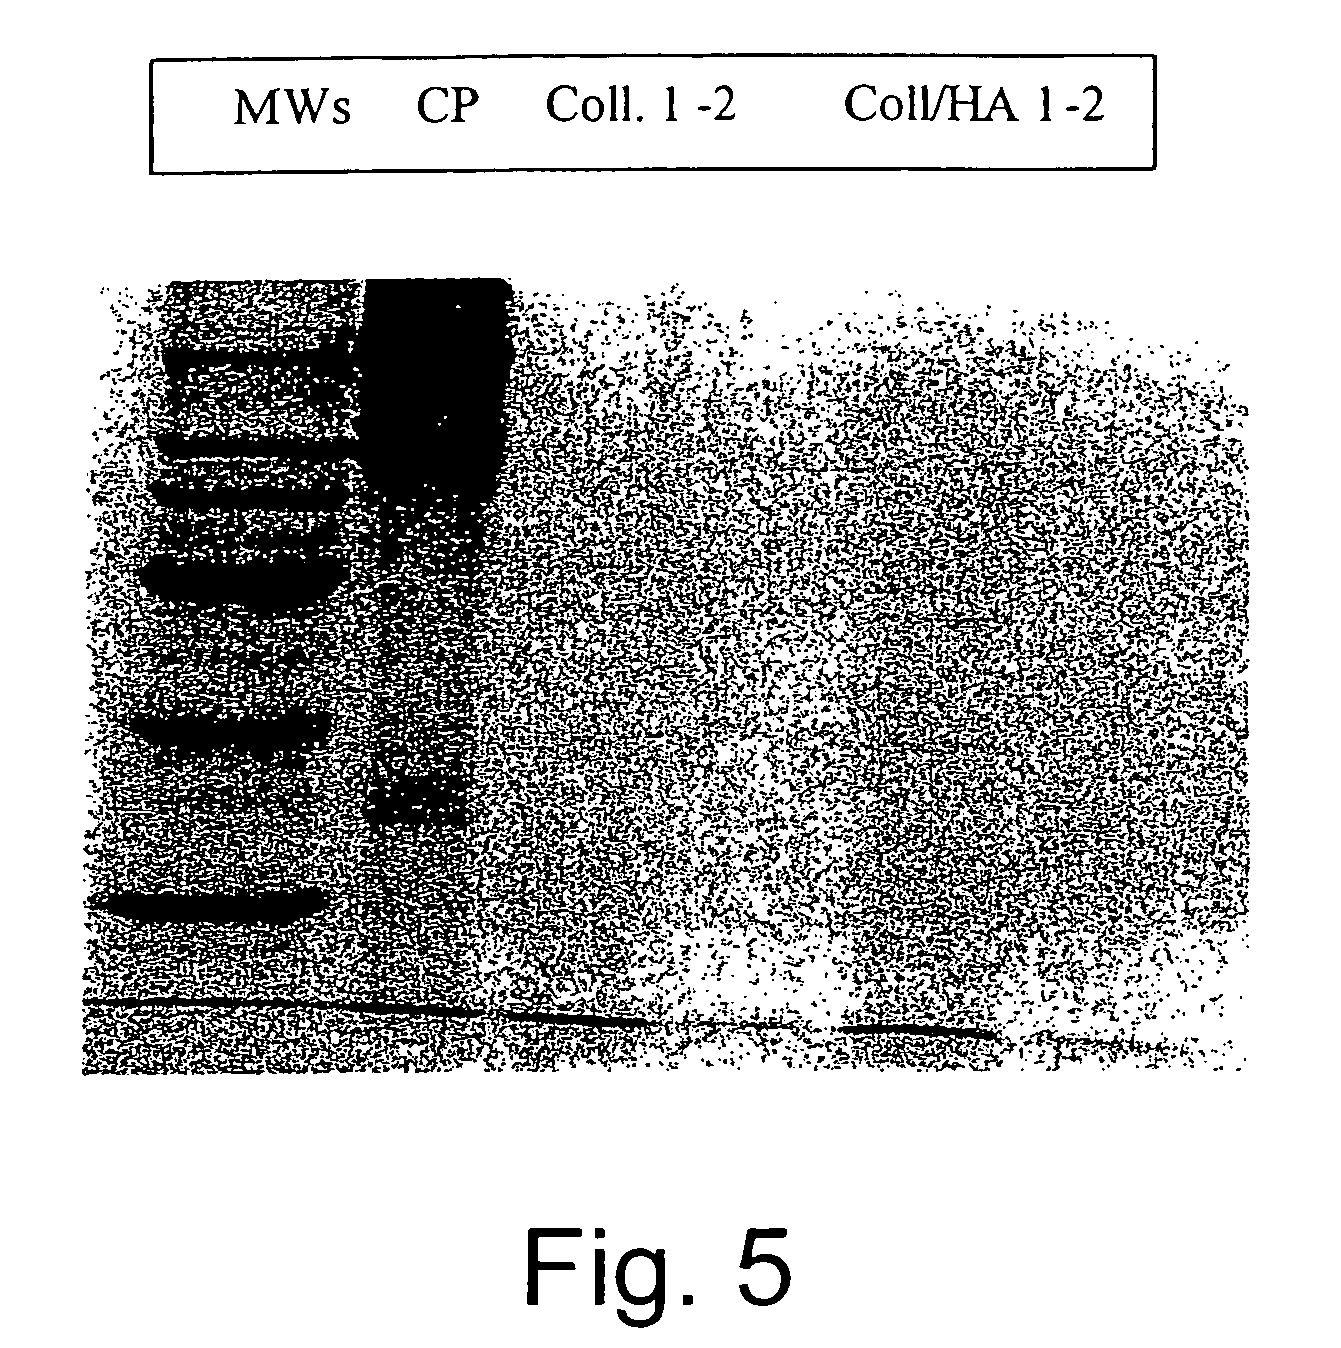 Pharmaceutical compositions containing hyaluronic acid and collagenase for the topical treatment of wounds, burns and ulcers